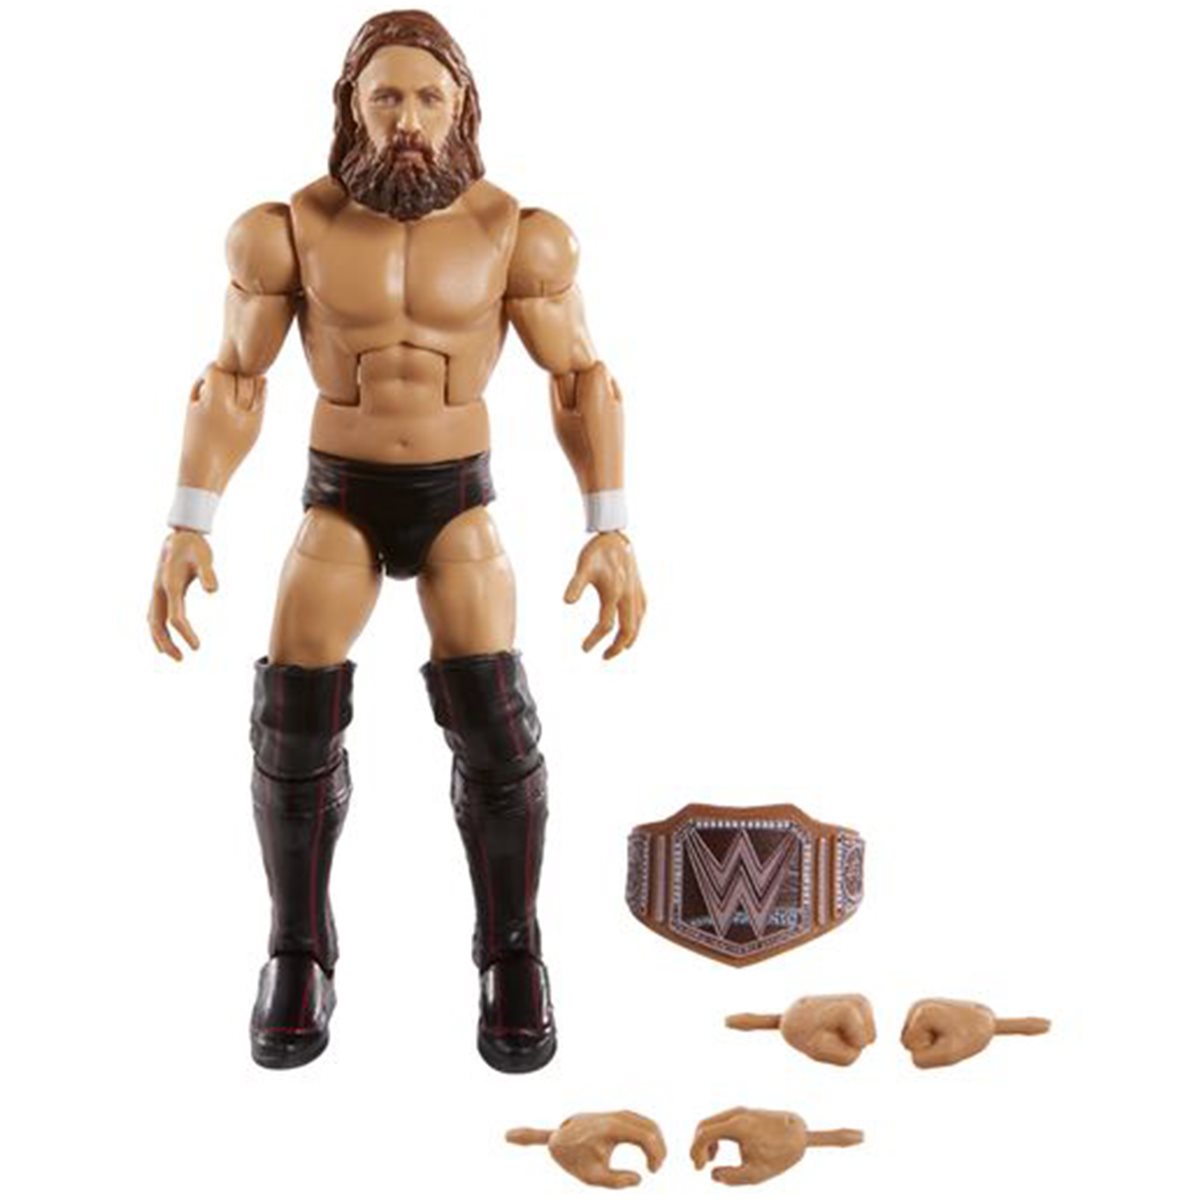 upcoming wwe action figures